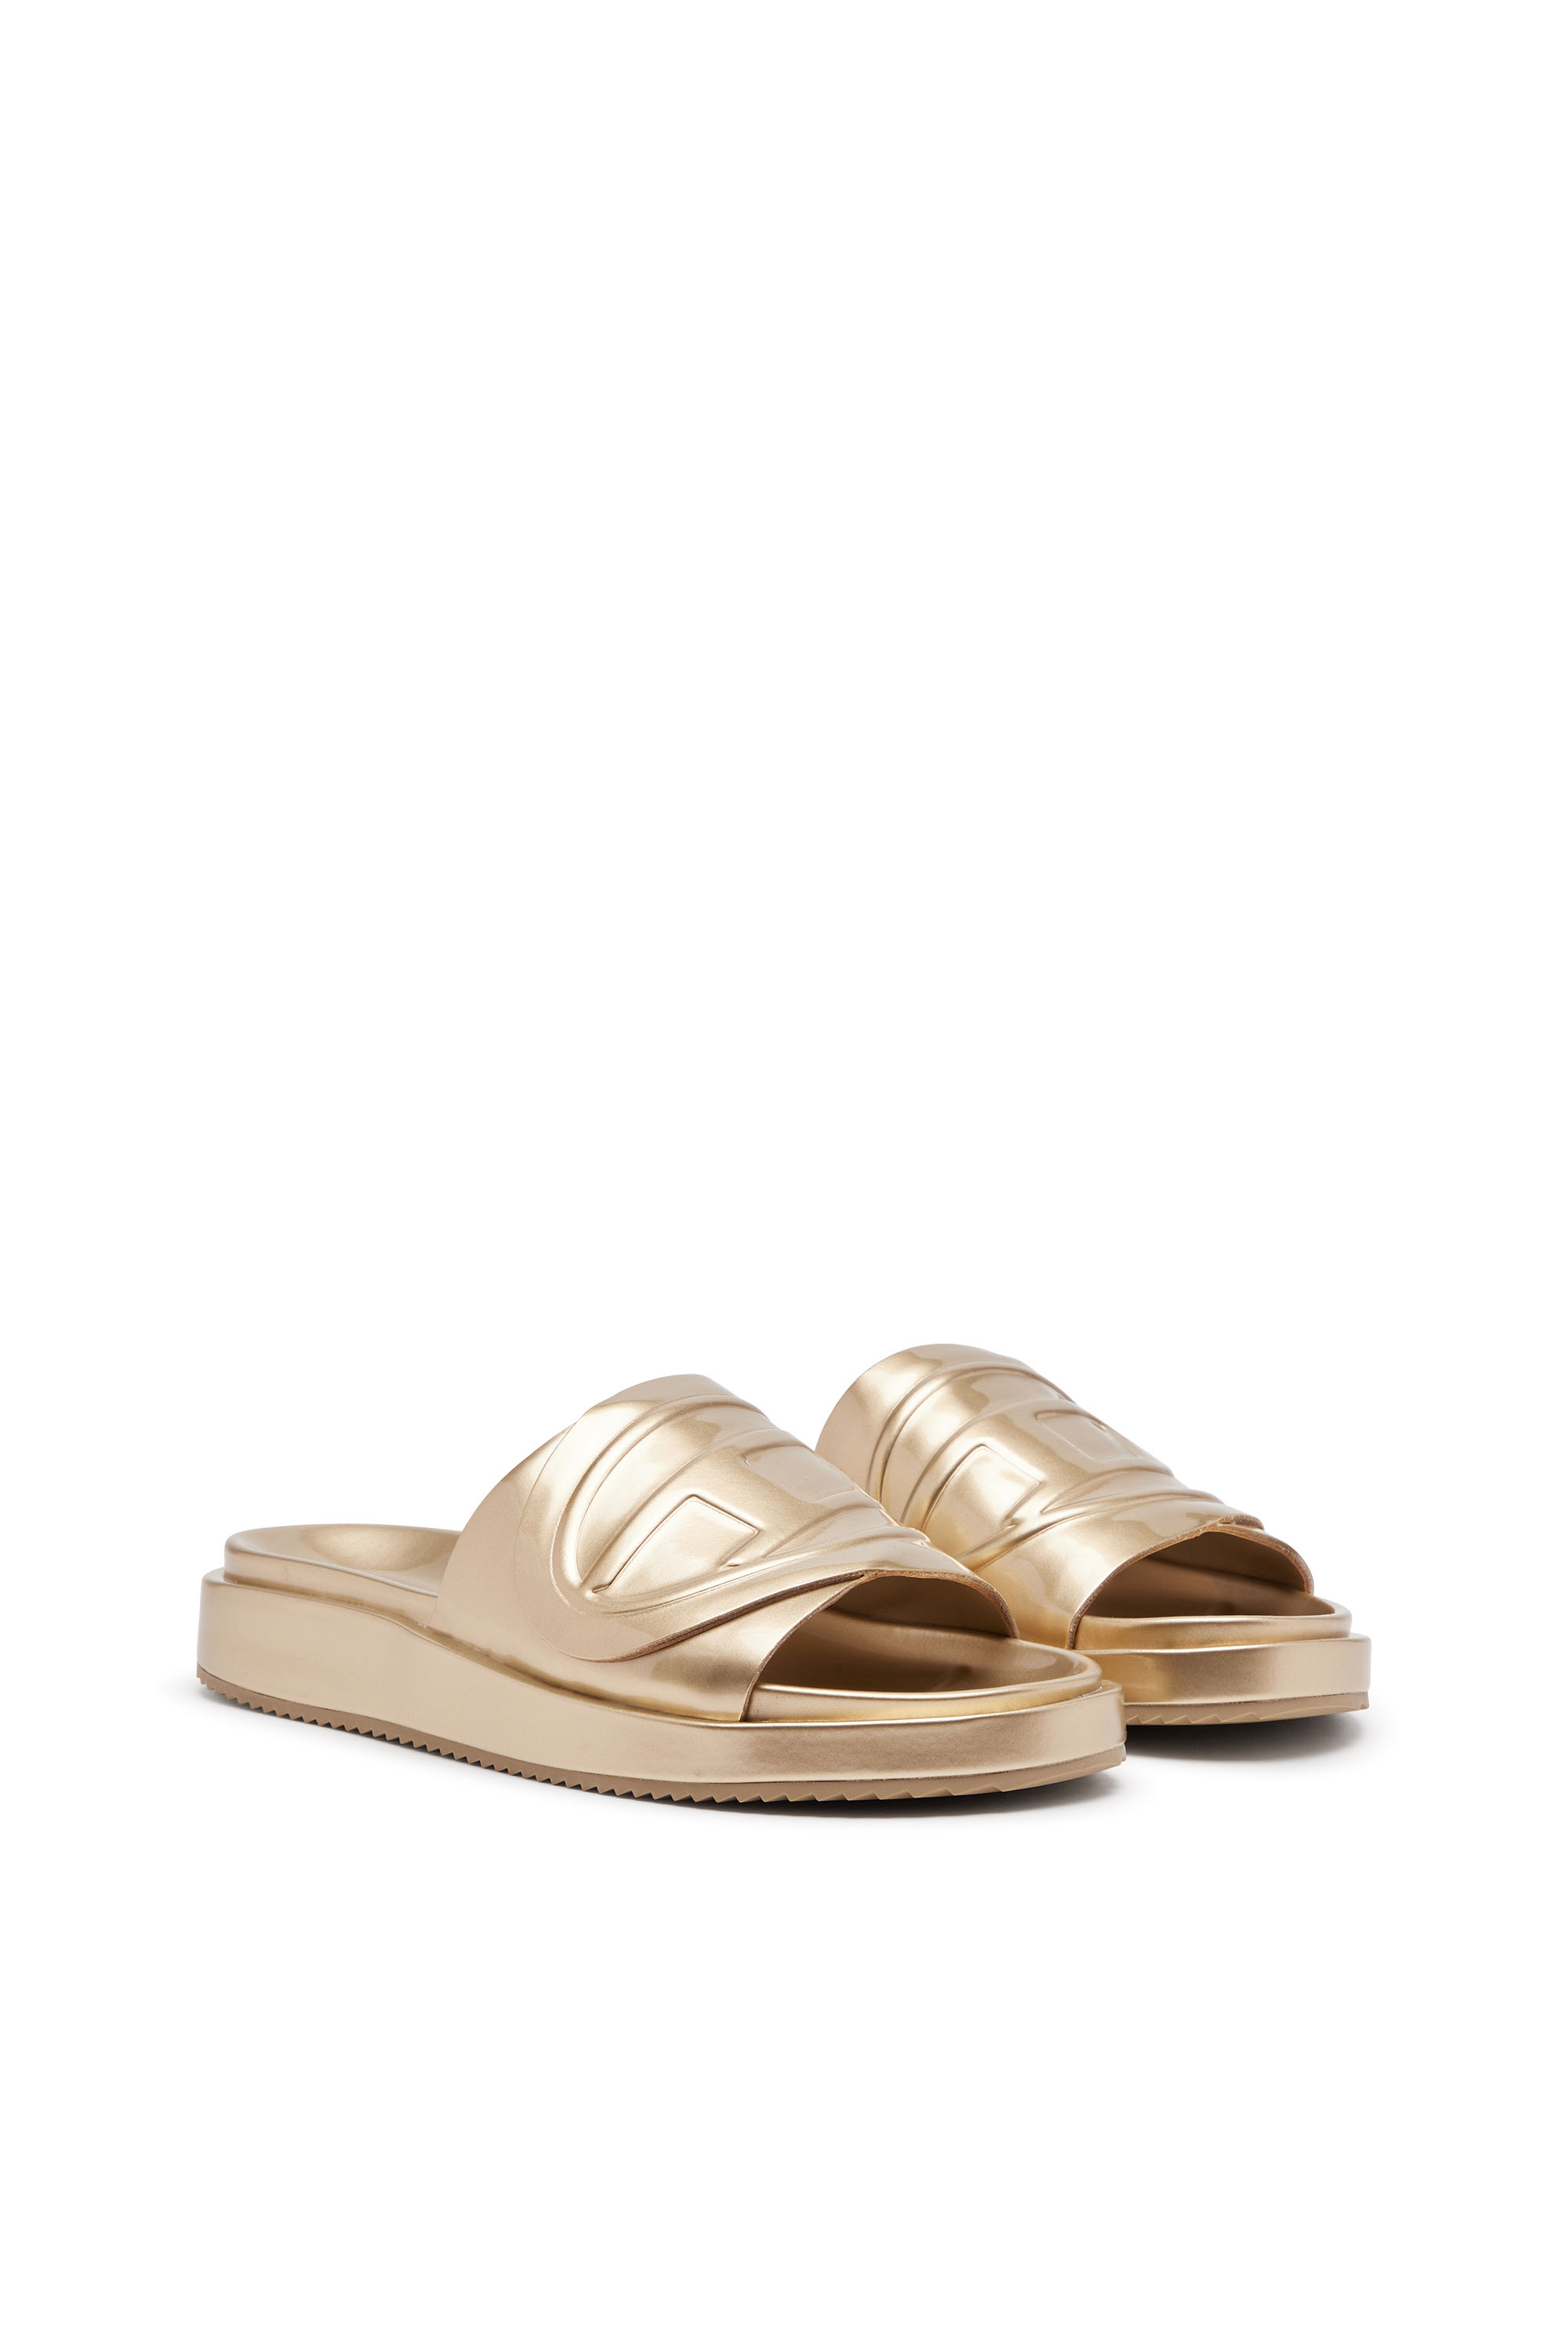 Diesel - SA-SLIDE D OVAL W, Woman Sa-Slide D-Metallic slide sandals with Oval D strap in Oro - Image 2